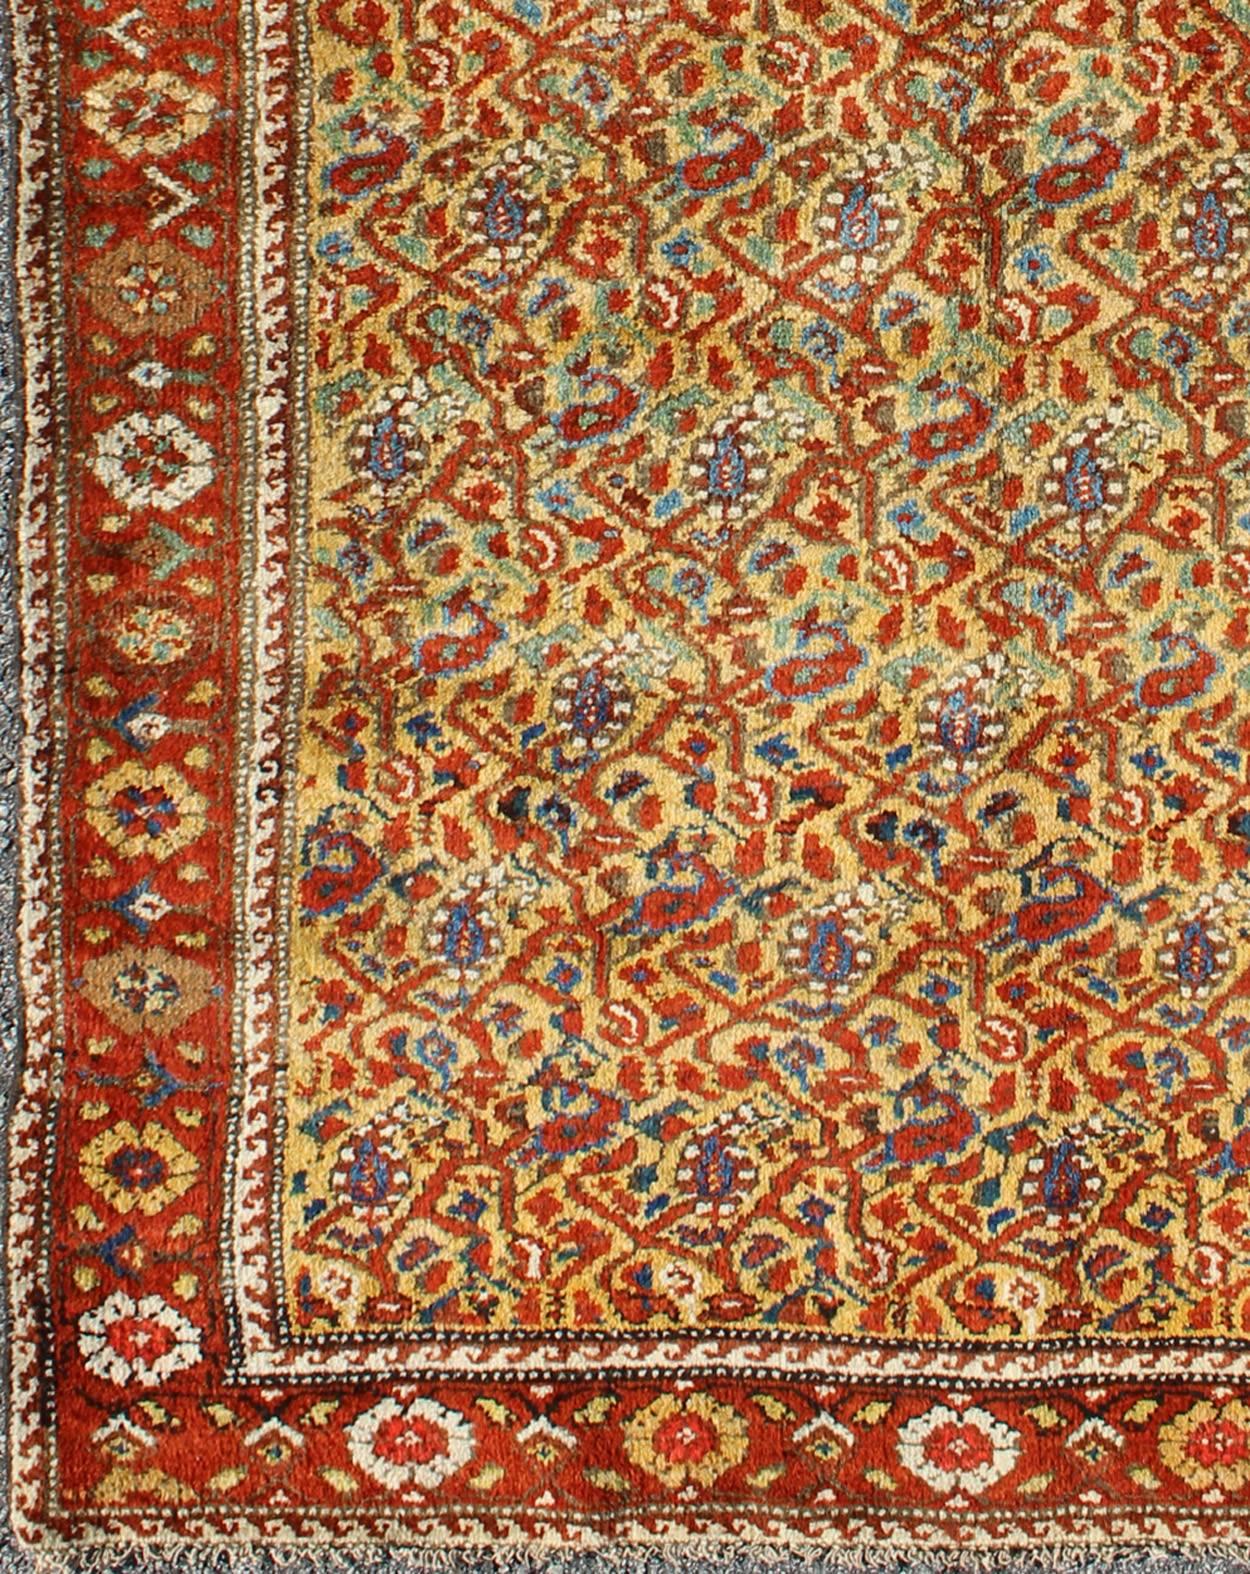 Unique antique Serab rug with Saffron Yellow background and Leaf / paisley pattern, rug M14-1005, country of origin / type: Iran / Tabriz, circa 1900

This all-over Persian Serab carpet (circa 1920) has a cream / yellow background and a red border.